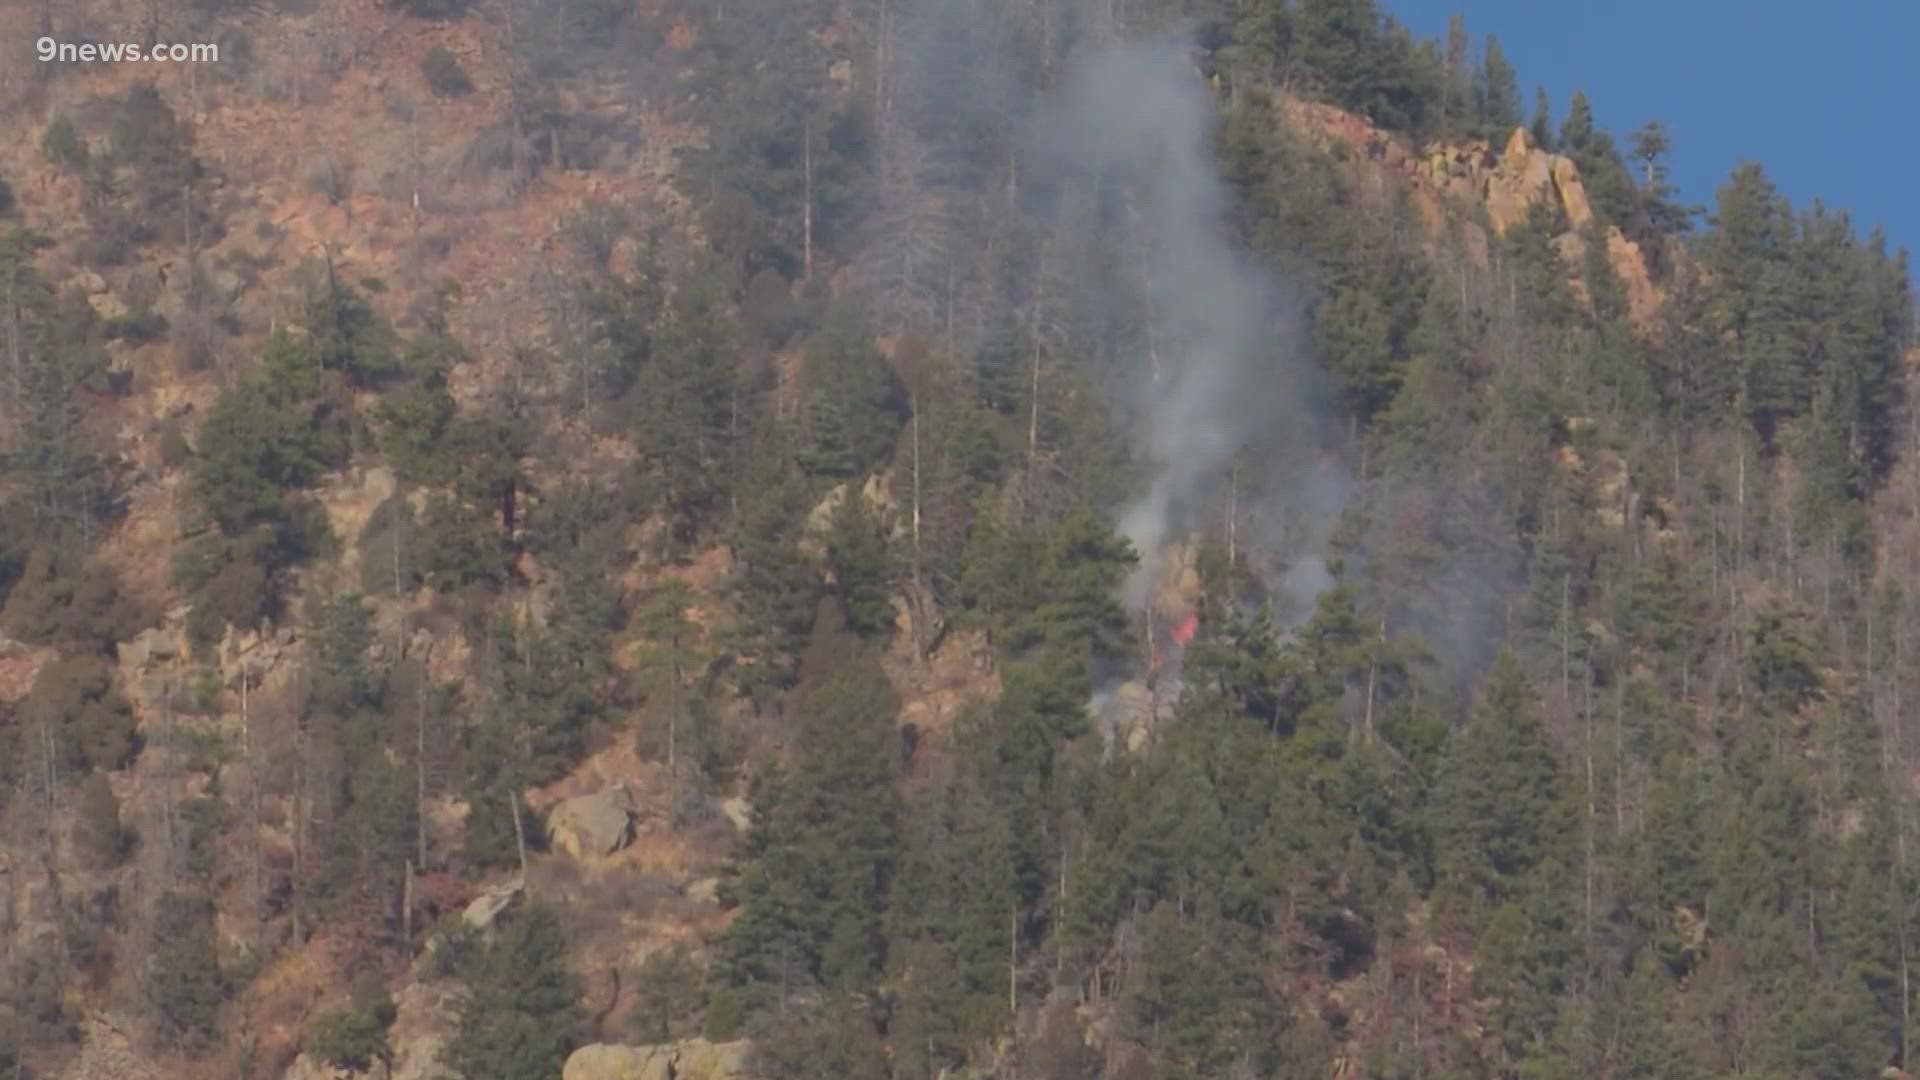 The fire is burning north of the Waldo Canyon burn scar.